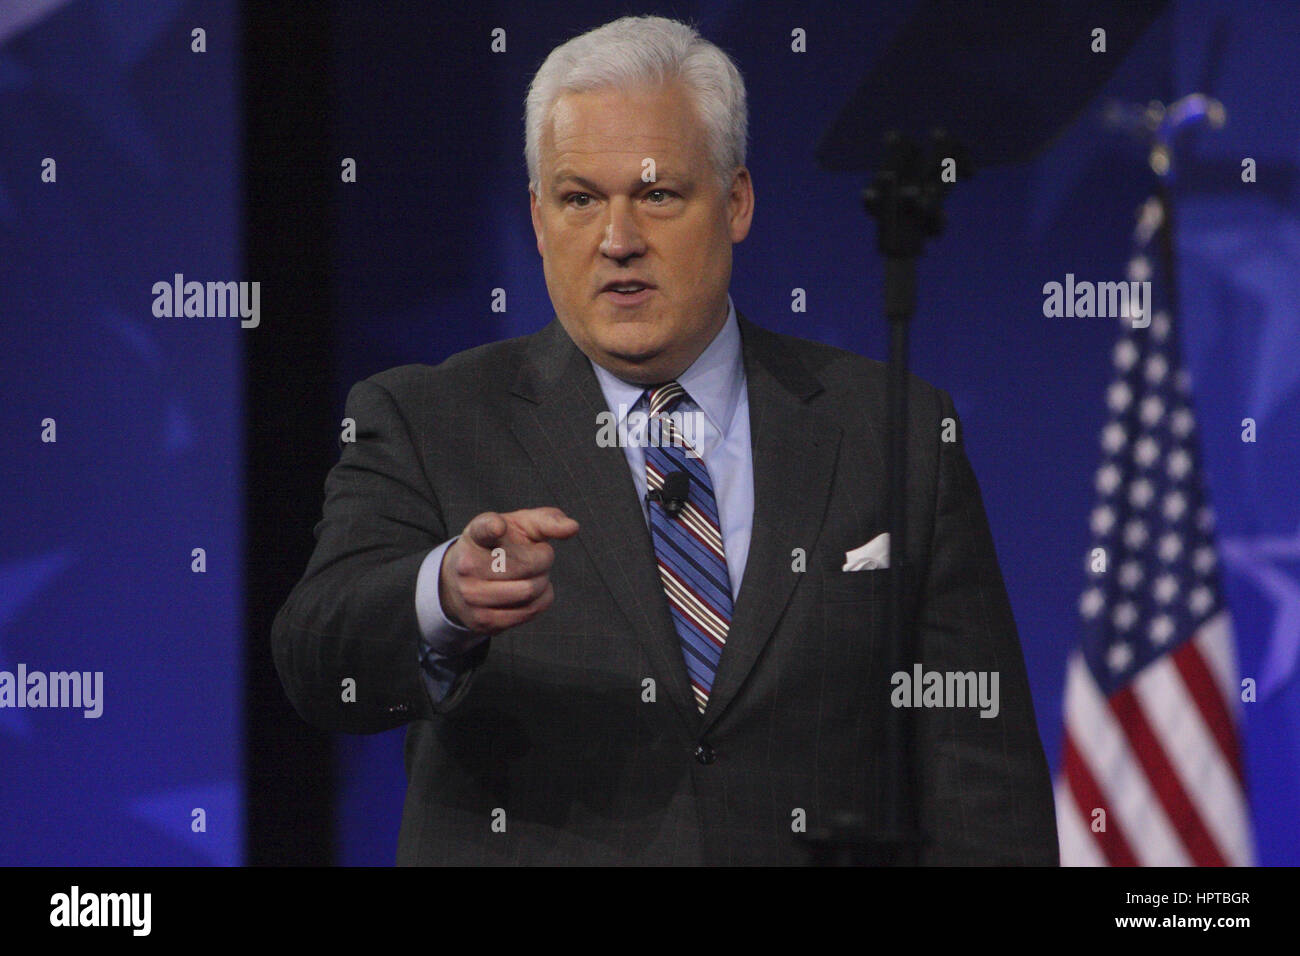 National Harbor, MARYLAND, USA. 24th Feb, 2017. Matt Schlapp, chairman of the American Conservative Union, speaking on the third day of the 2017 Conservative Political Action Conference just before introducing President Trump. Credit: Evan Golub/ZUMA Wire/Alamy Live News Stock Photo